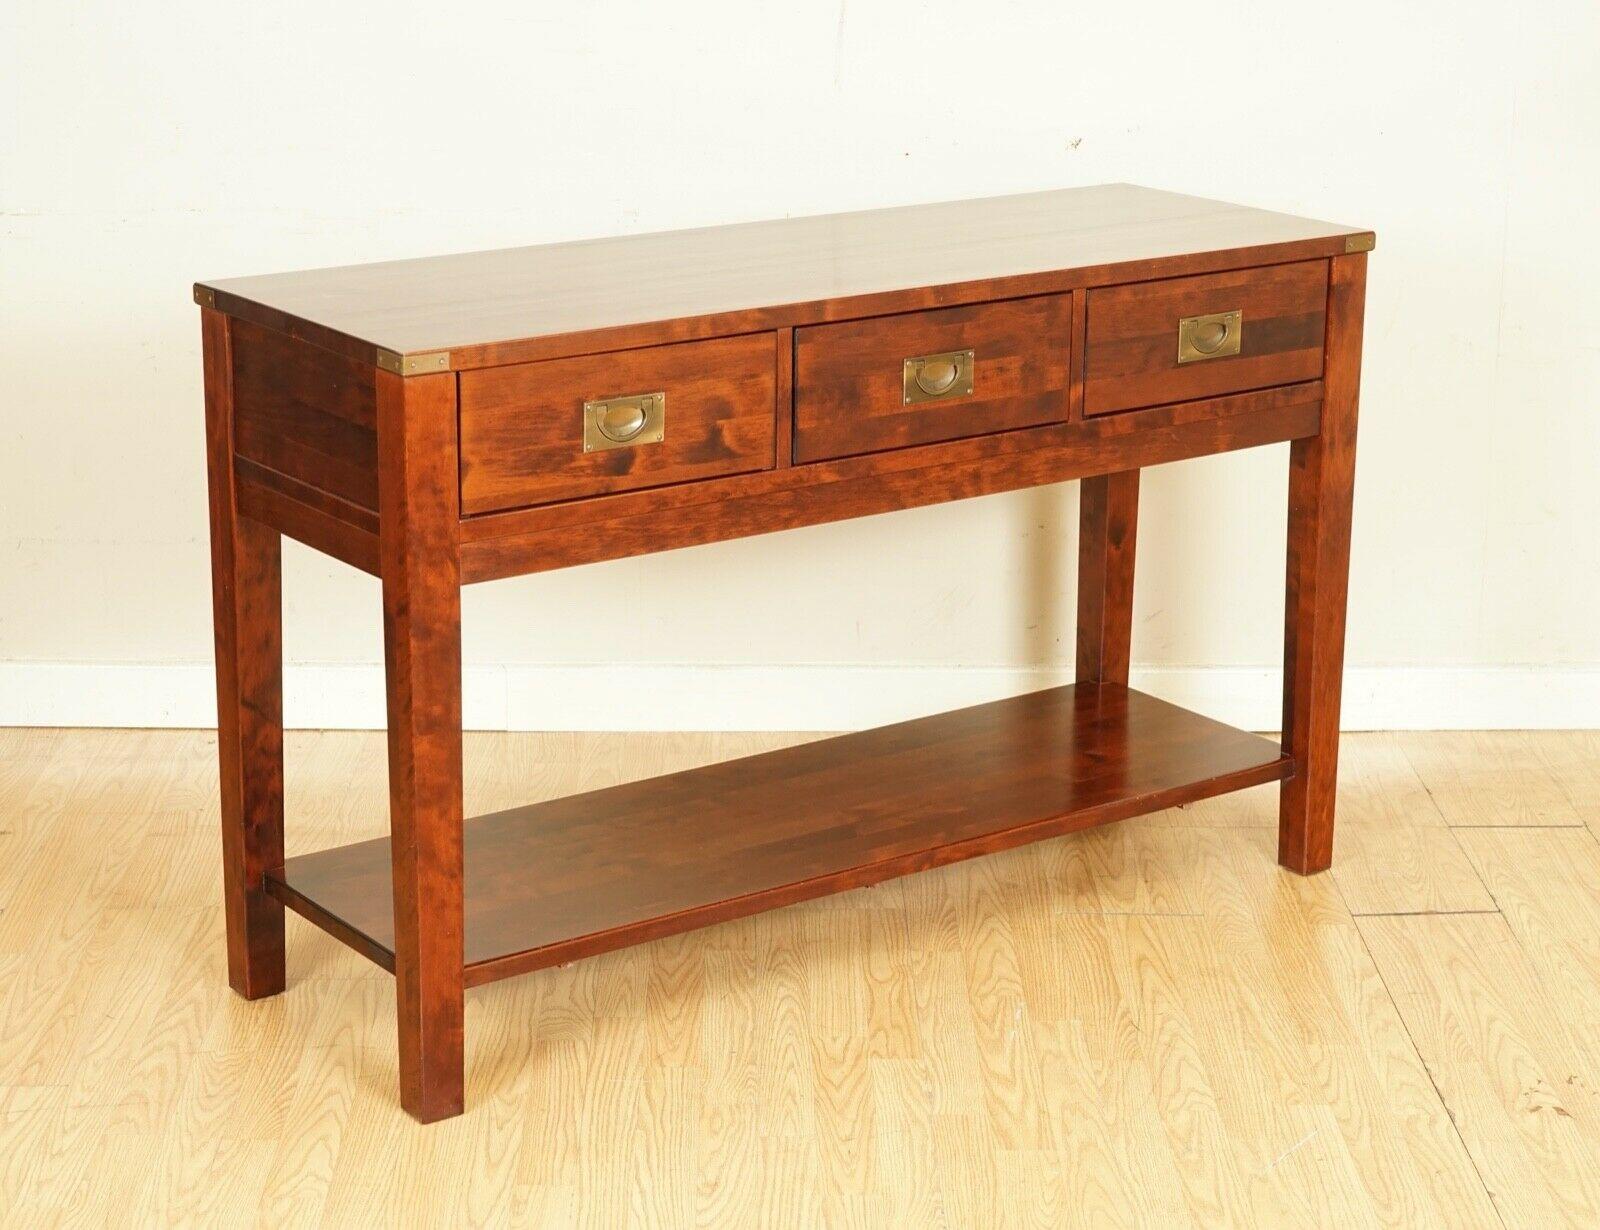 We are so excited to present to you this outstanding sideboard/console table by Laura Ashley.
The Chaldon range is handmade in Poland from Kiln dried solid birch, sourced from managed North European forests.
The handles are in the military